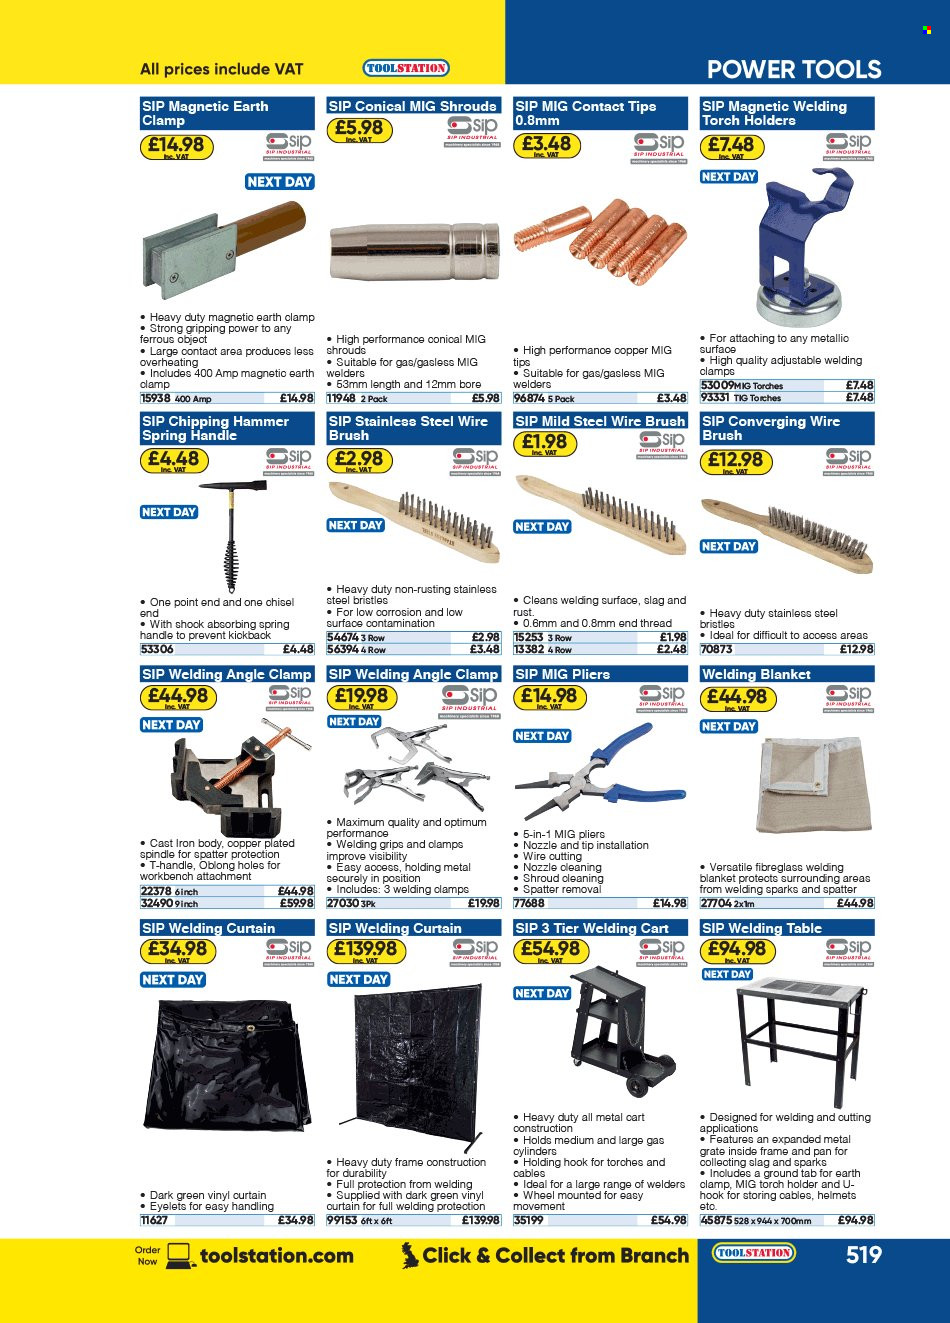 thumbnail - Toolstation offer  - Sales products - holder, hammer, pliers, wire brush, blanket, torch holder, cart. Page 519.